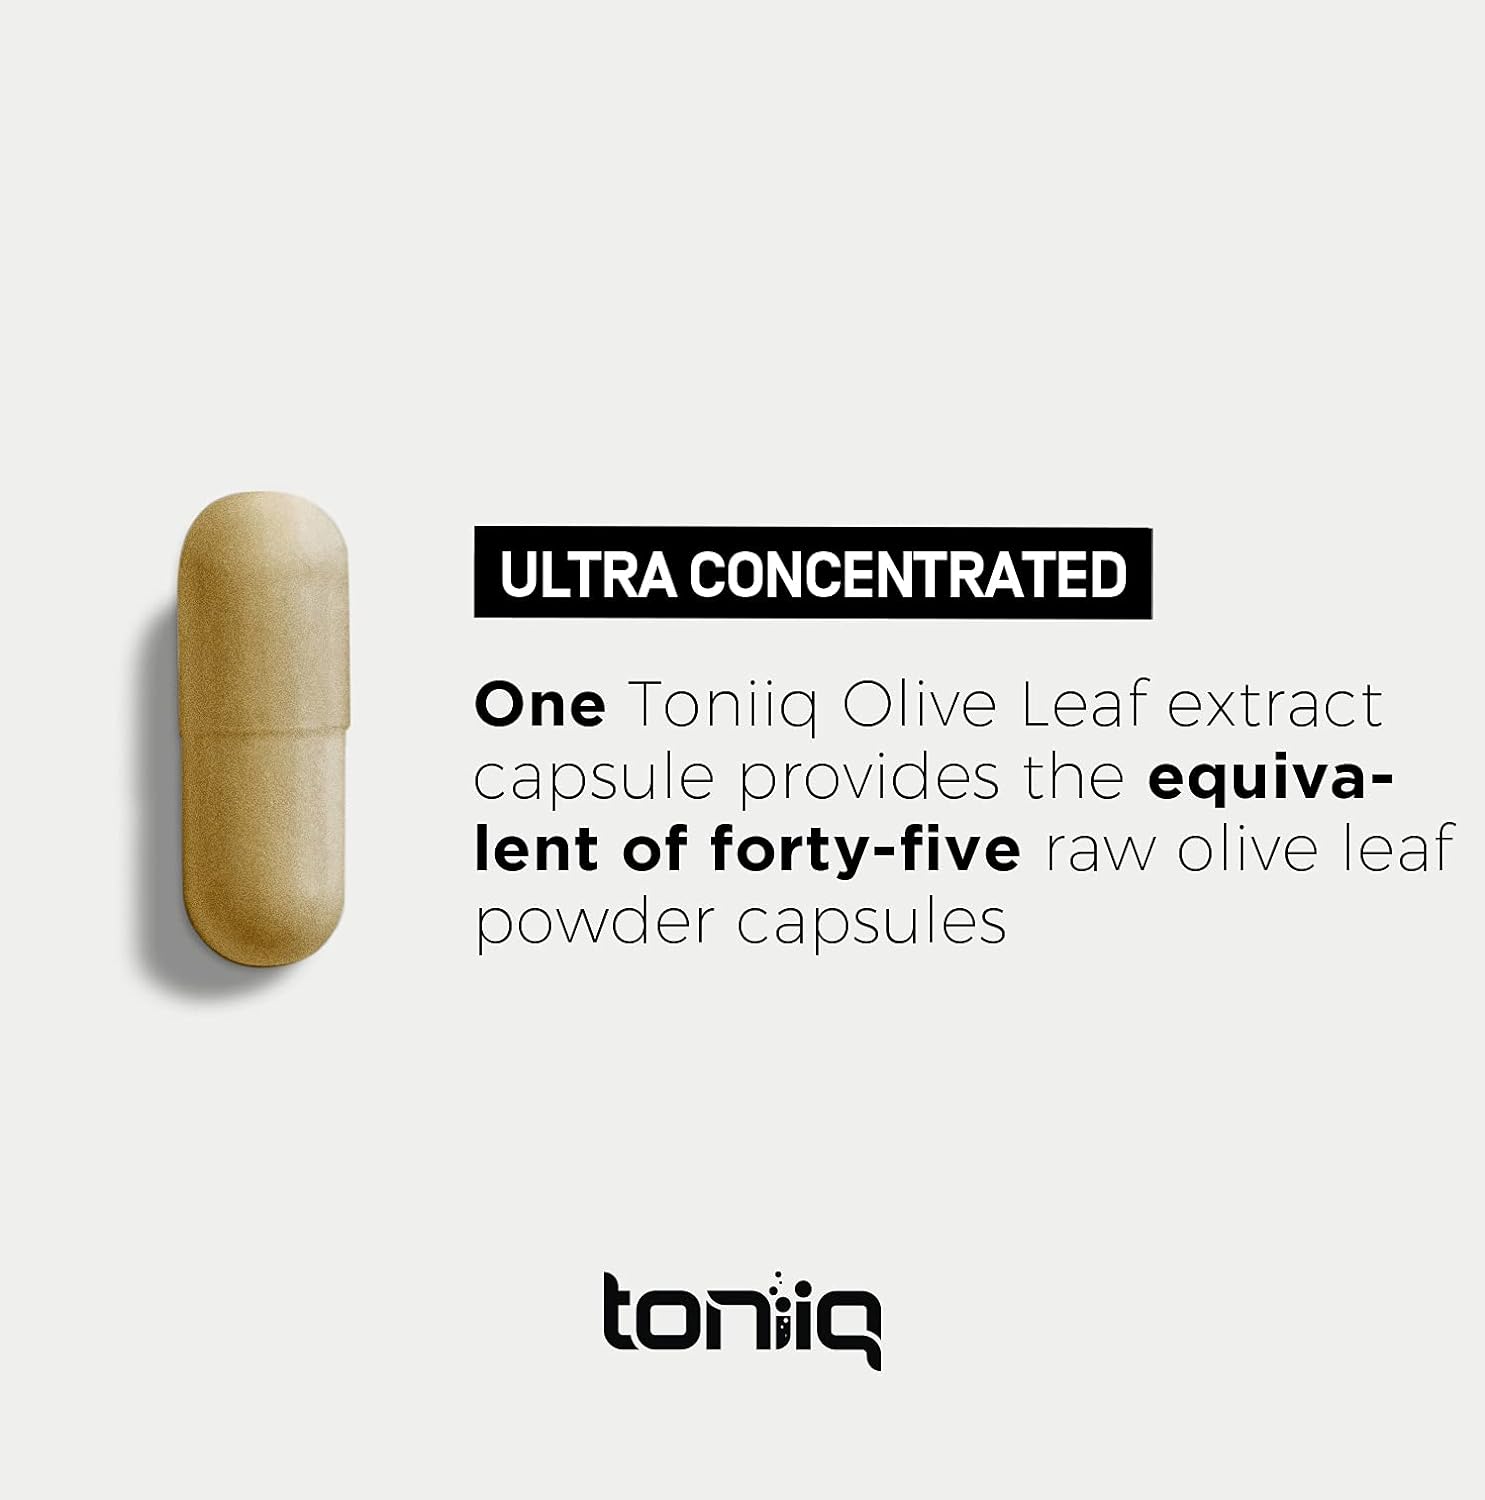 Toniiq Olive Leaf Extract 45x Concentrated Ultra High Strength - Min. 50% Oleuropein